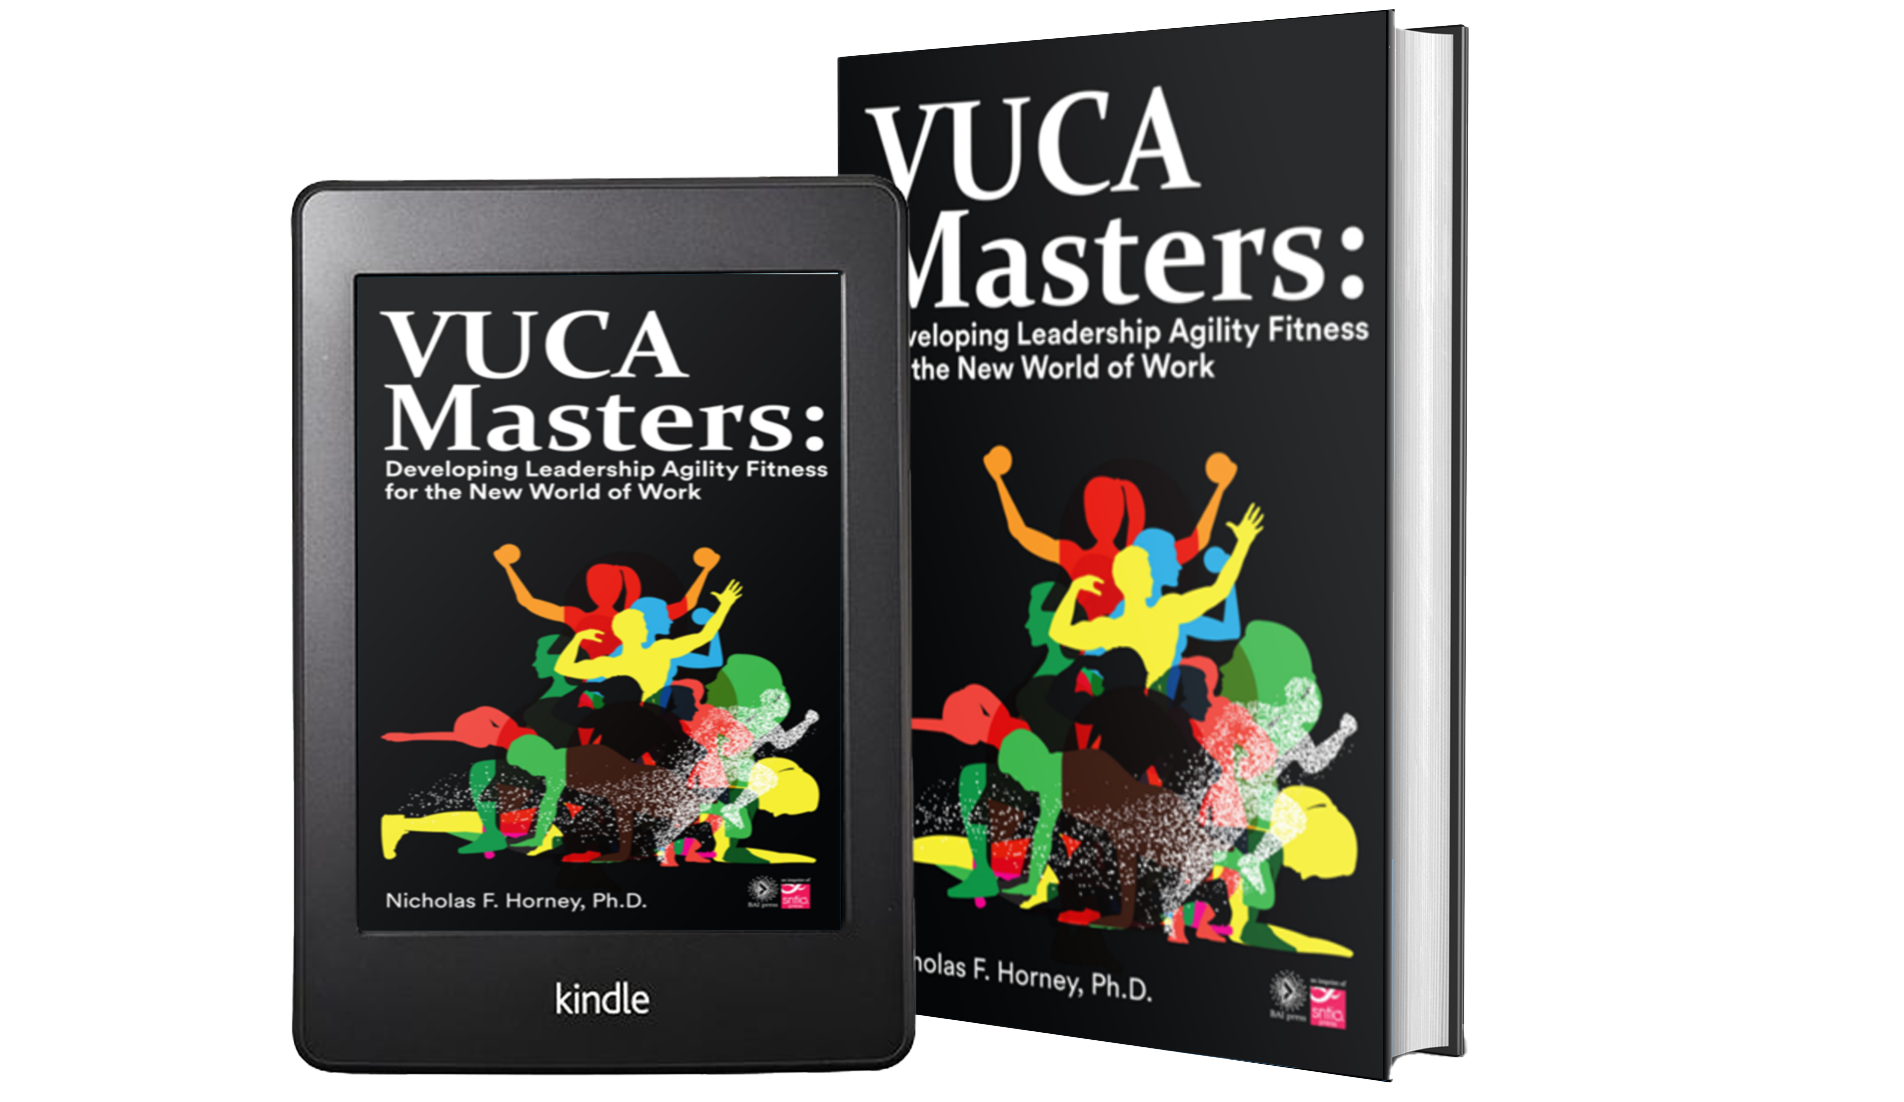 VUCA Masters: Developing Leadership Agility Fitness for the New World of Work